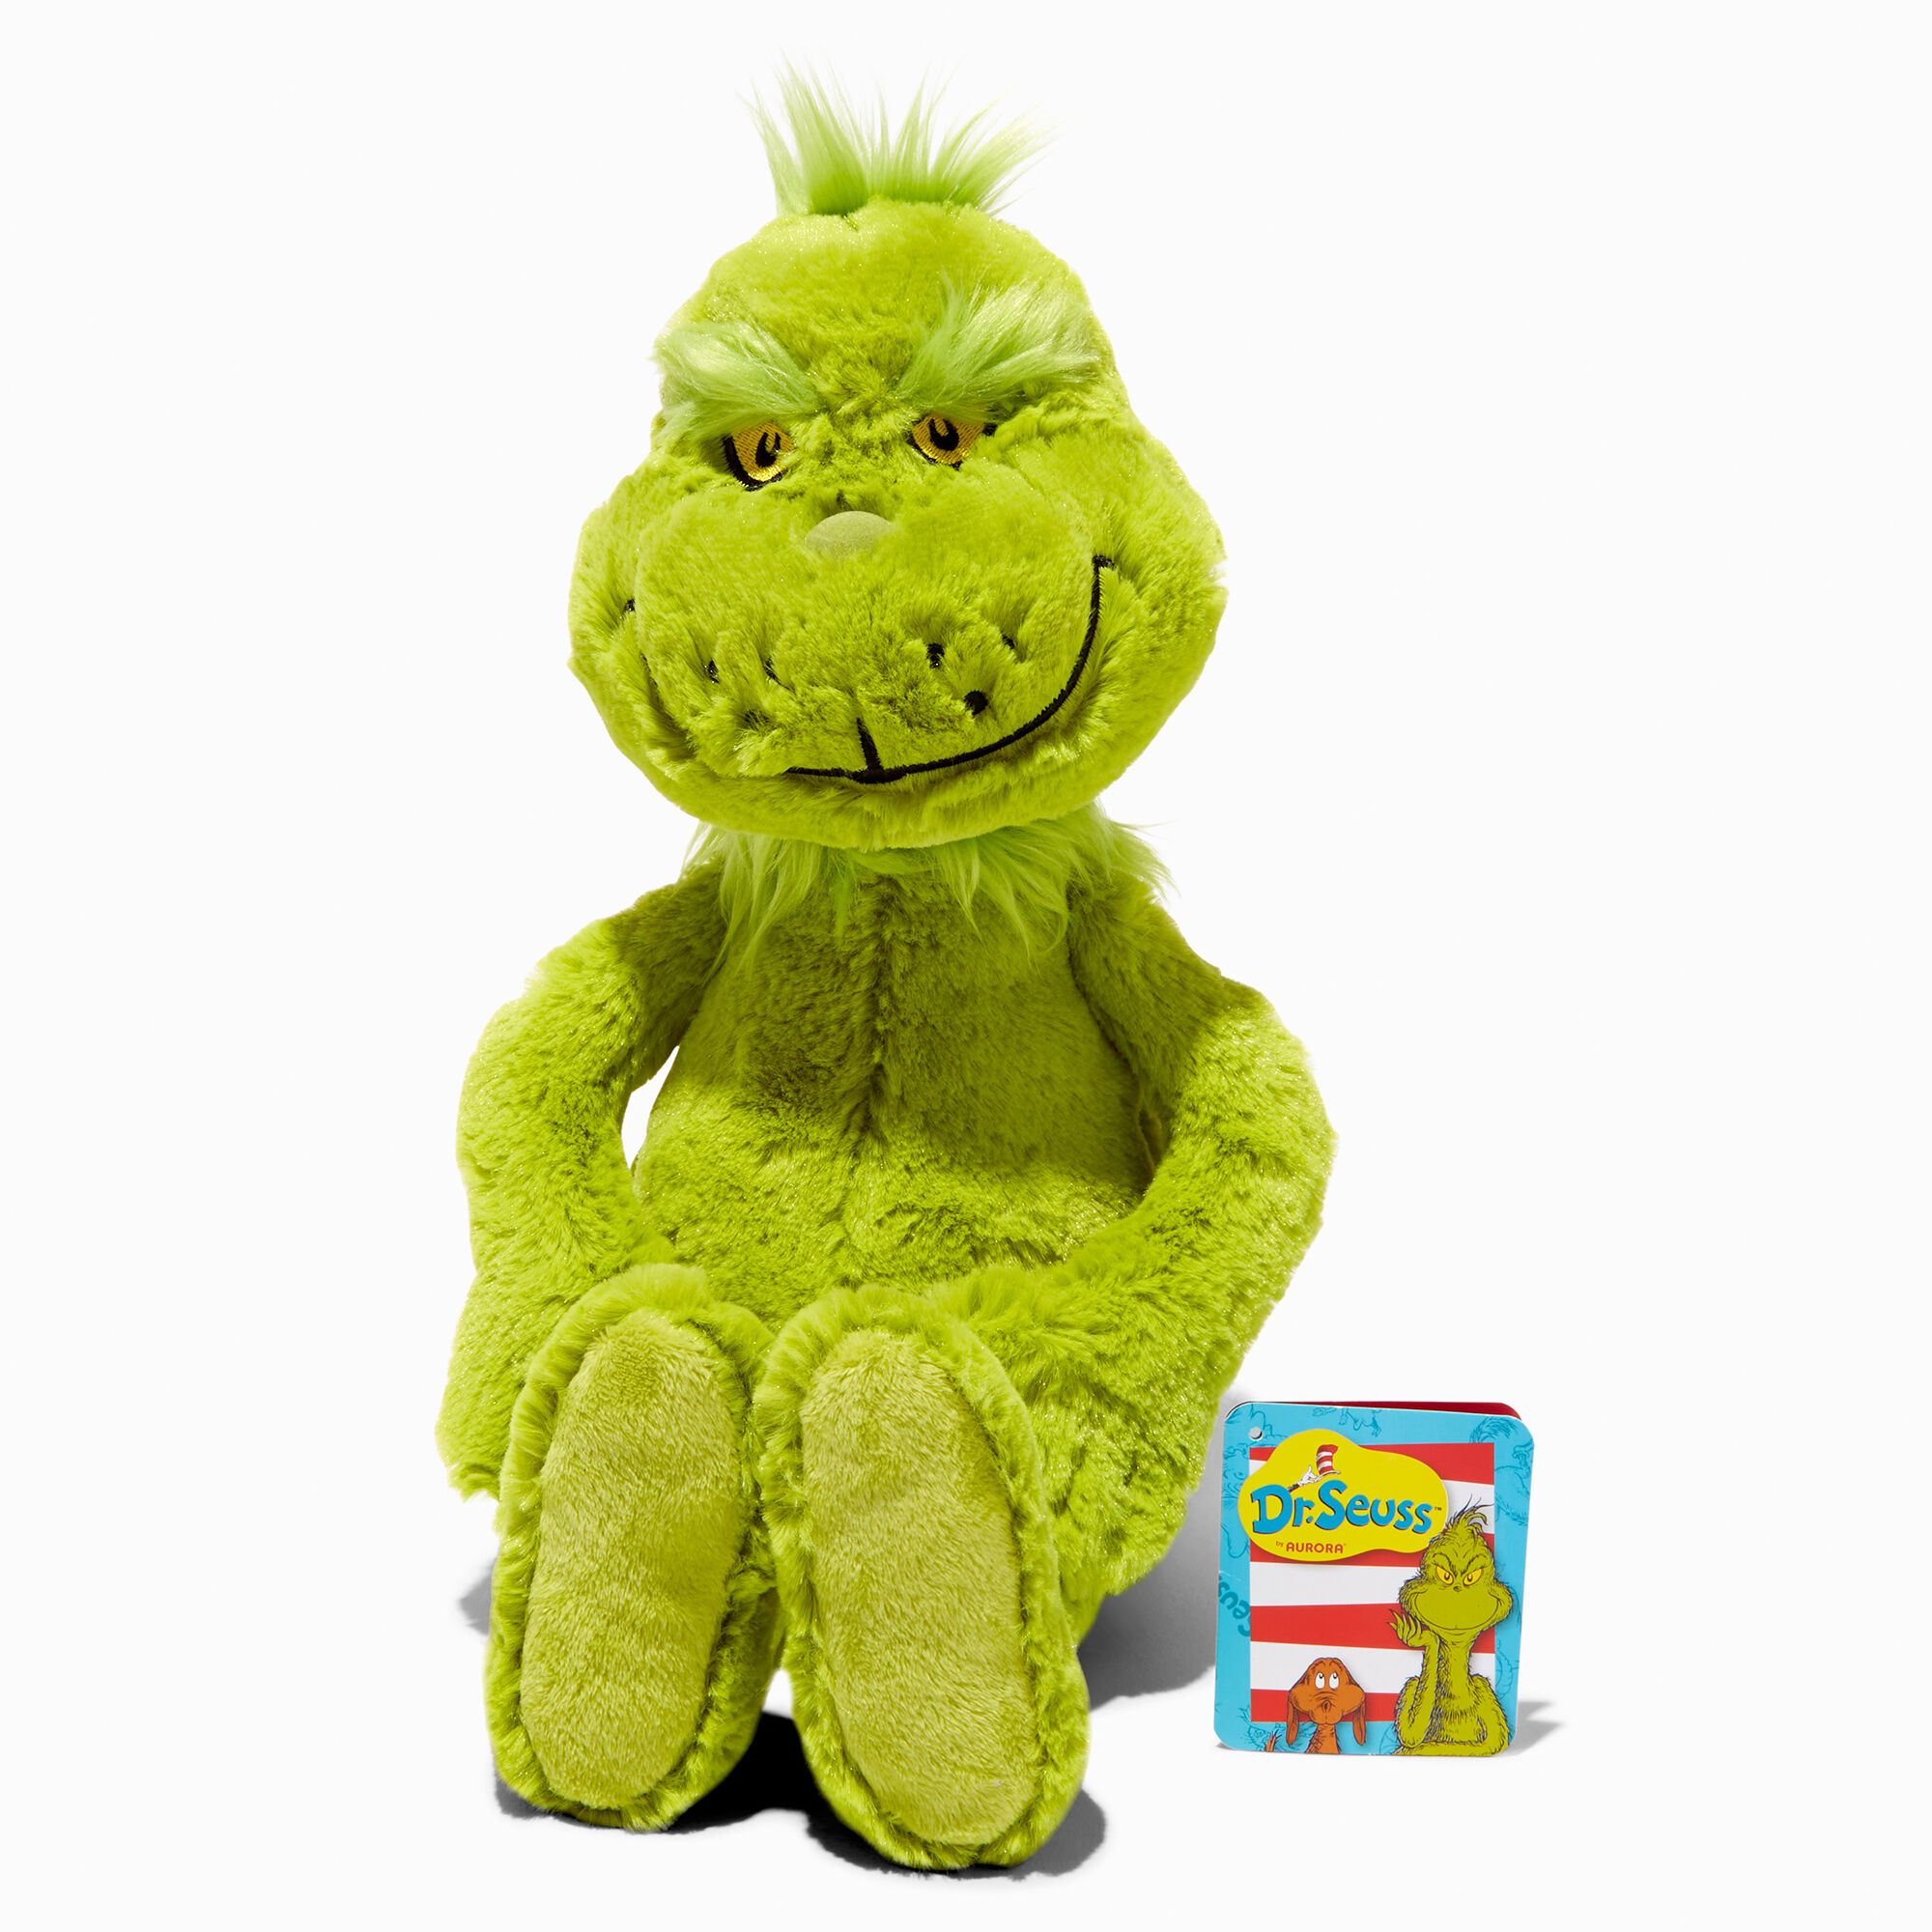 View Claires Dr Seuss The Grinch 20 Plush Toy information